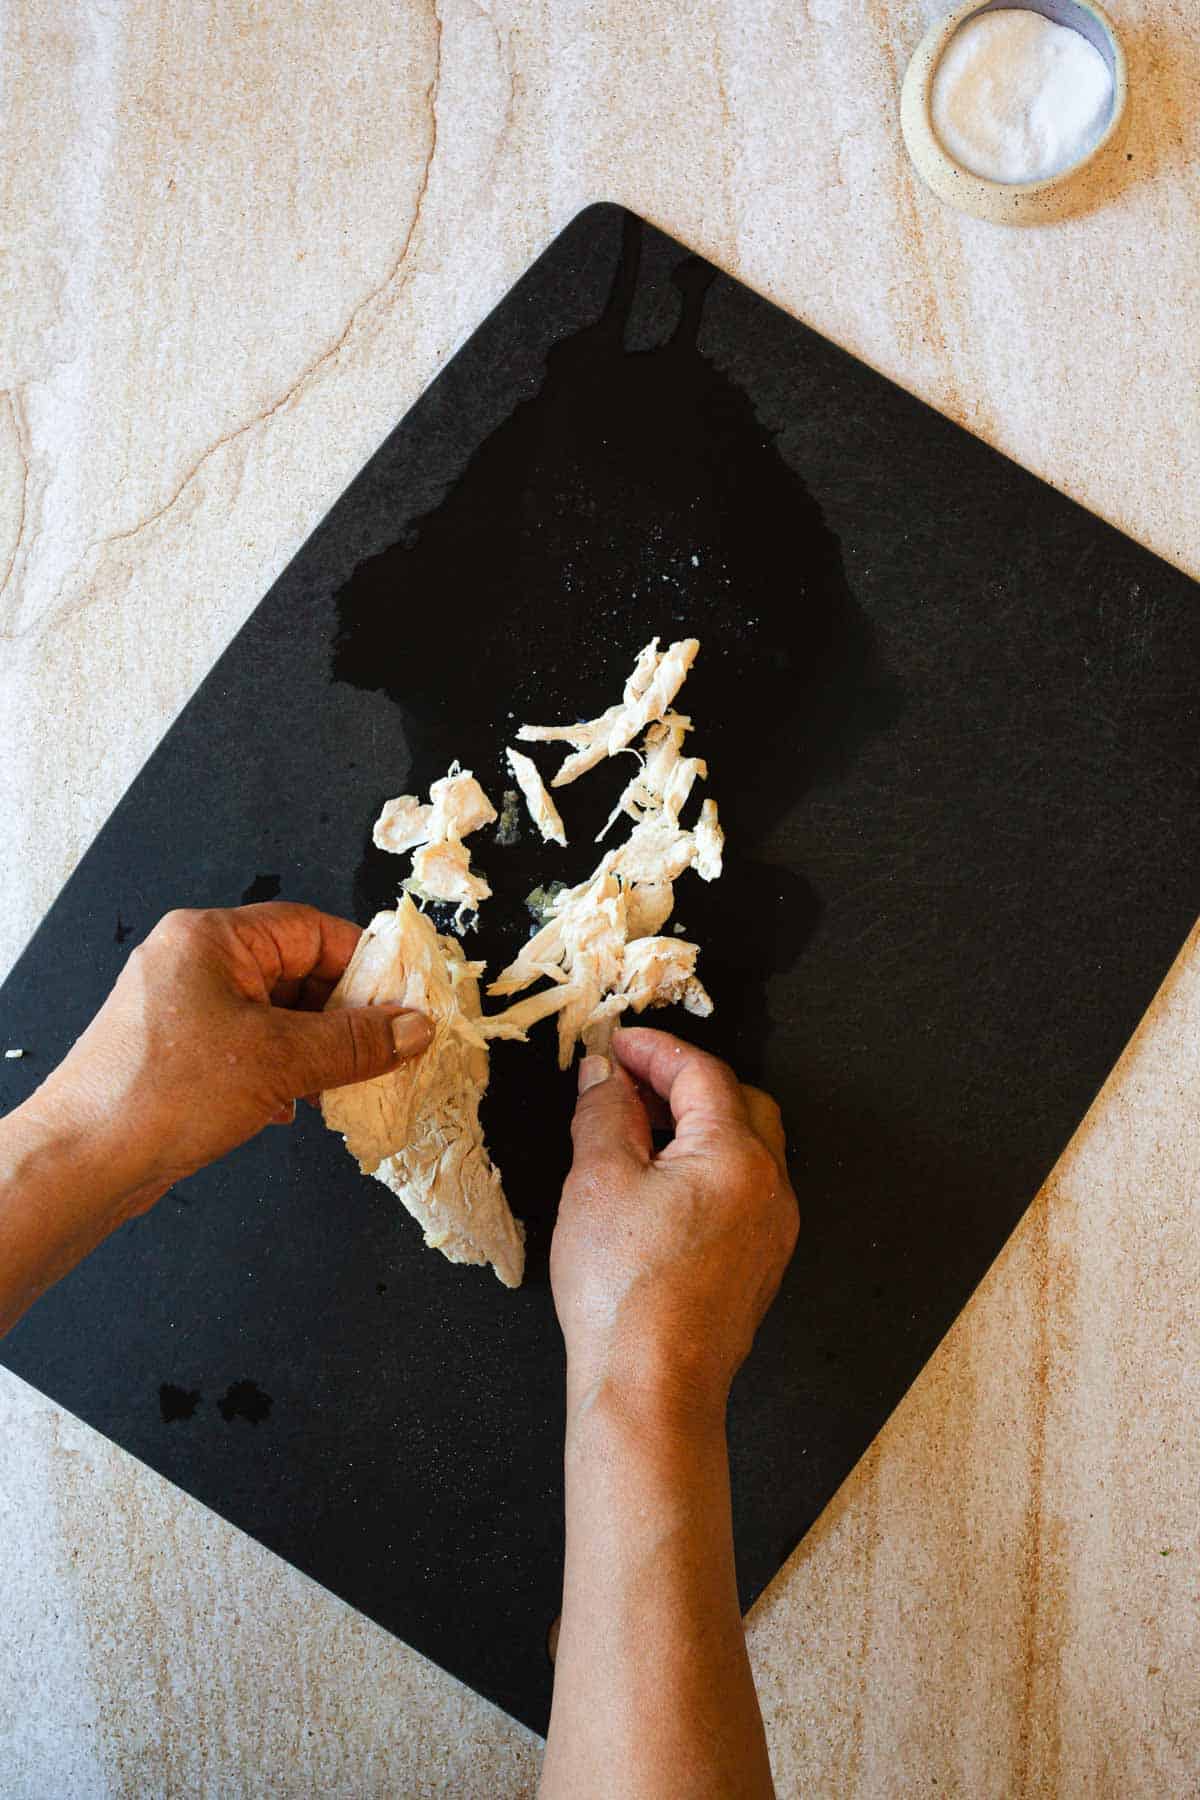 A person is shredding chicken on a black cutting board with a small dish of salt to the side.